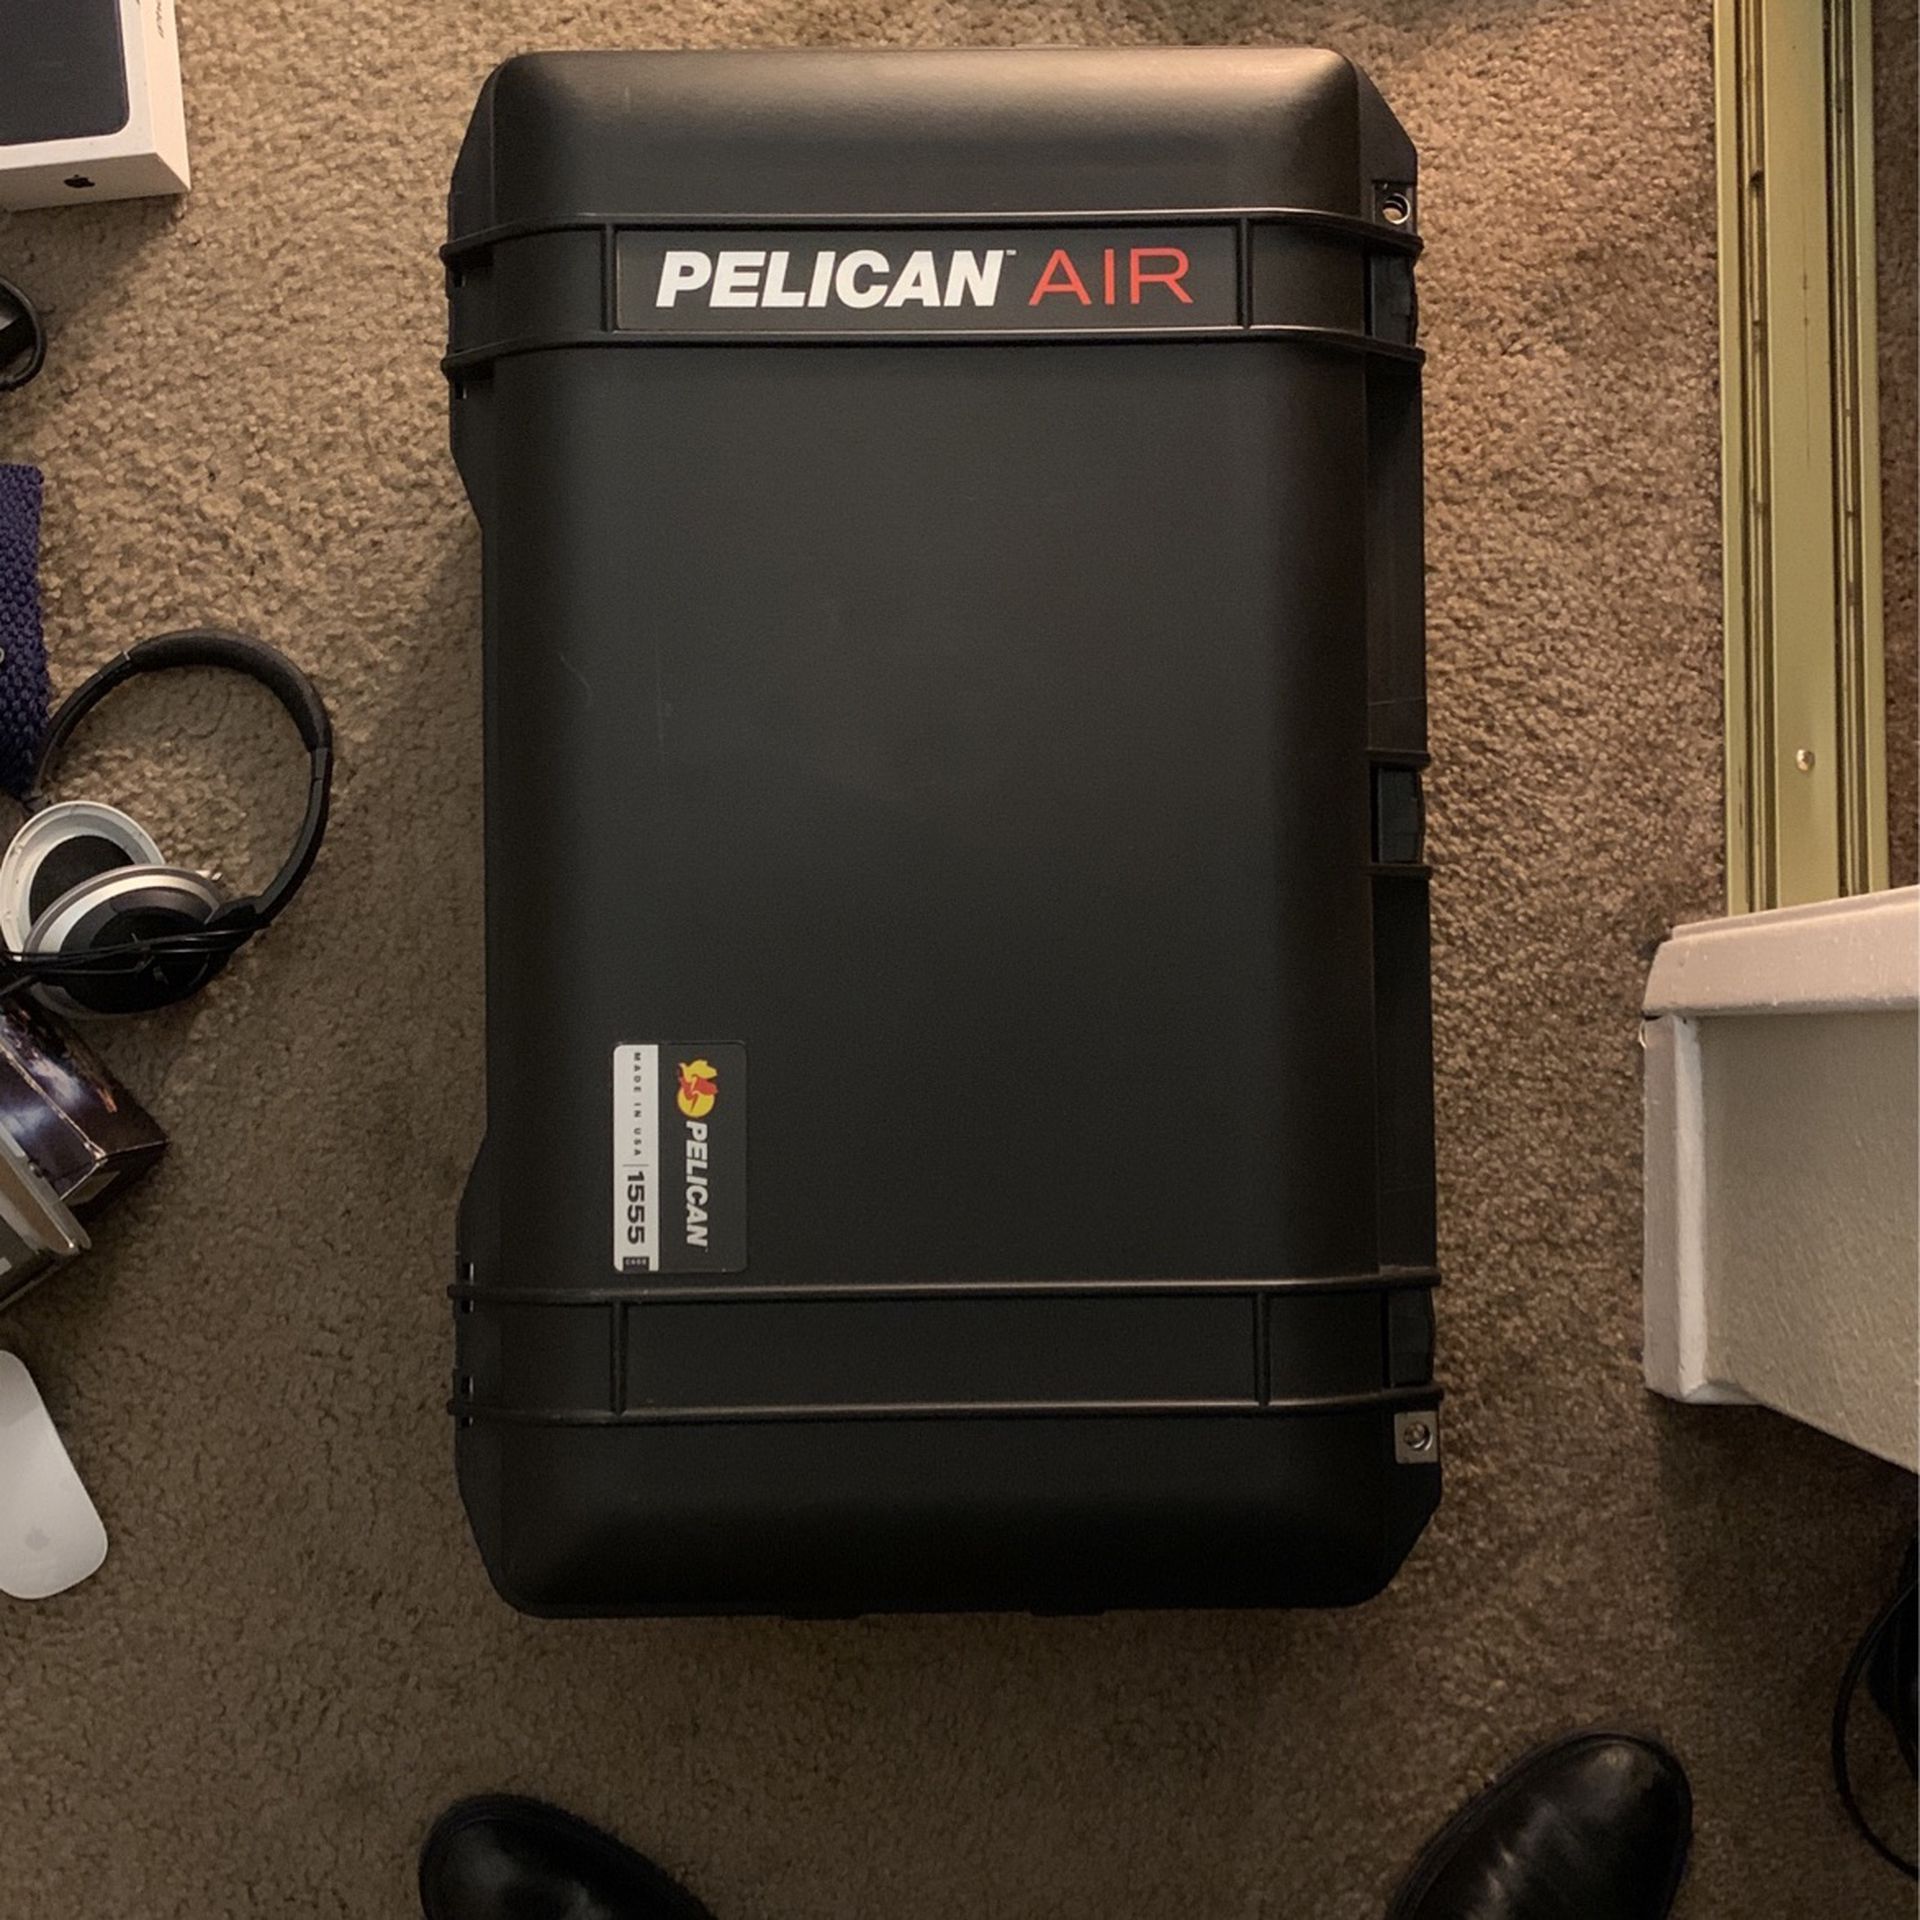 Pelican Air 1555 Perfect Conditions With Foam